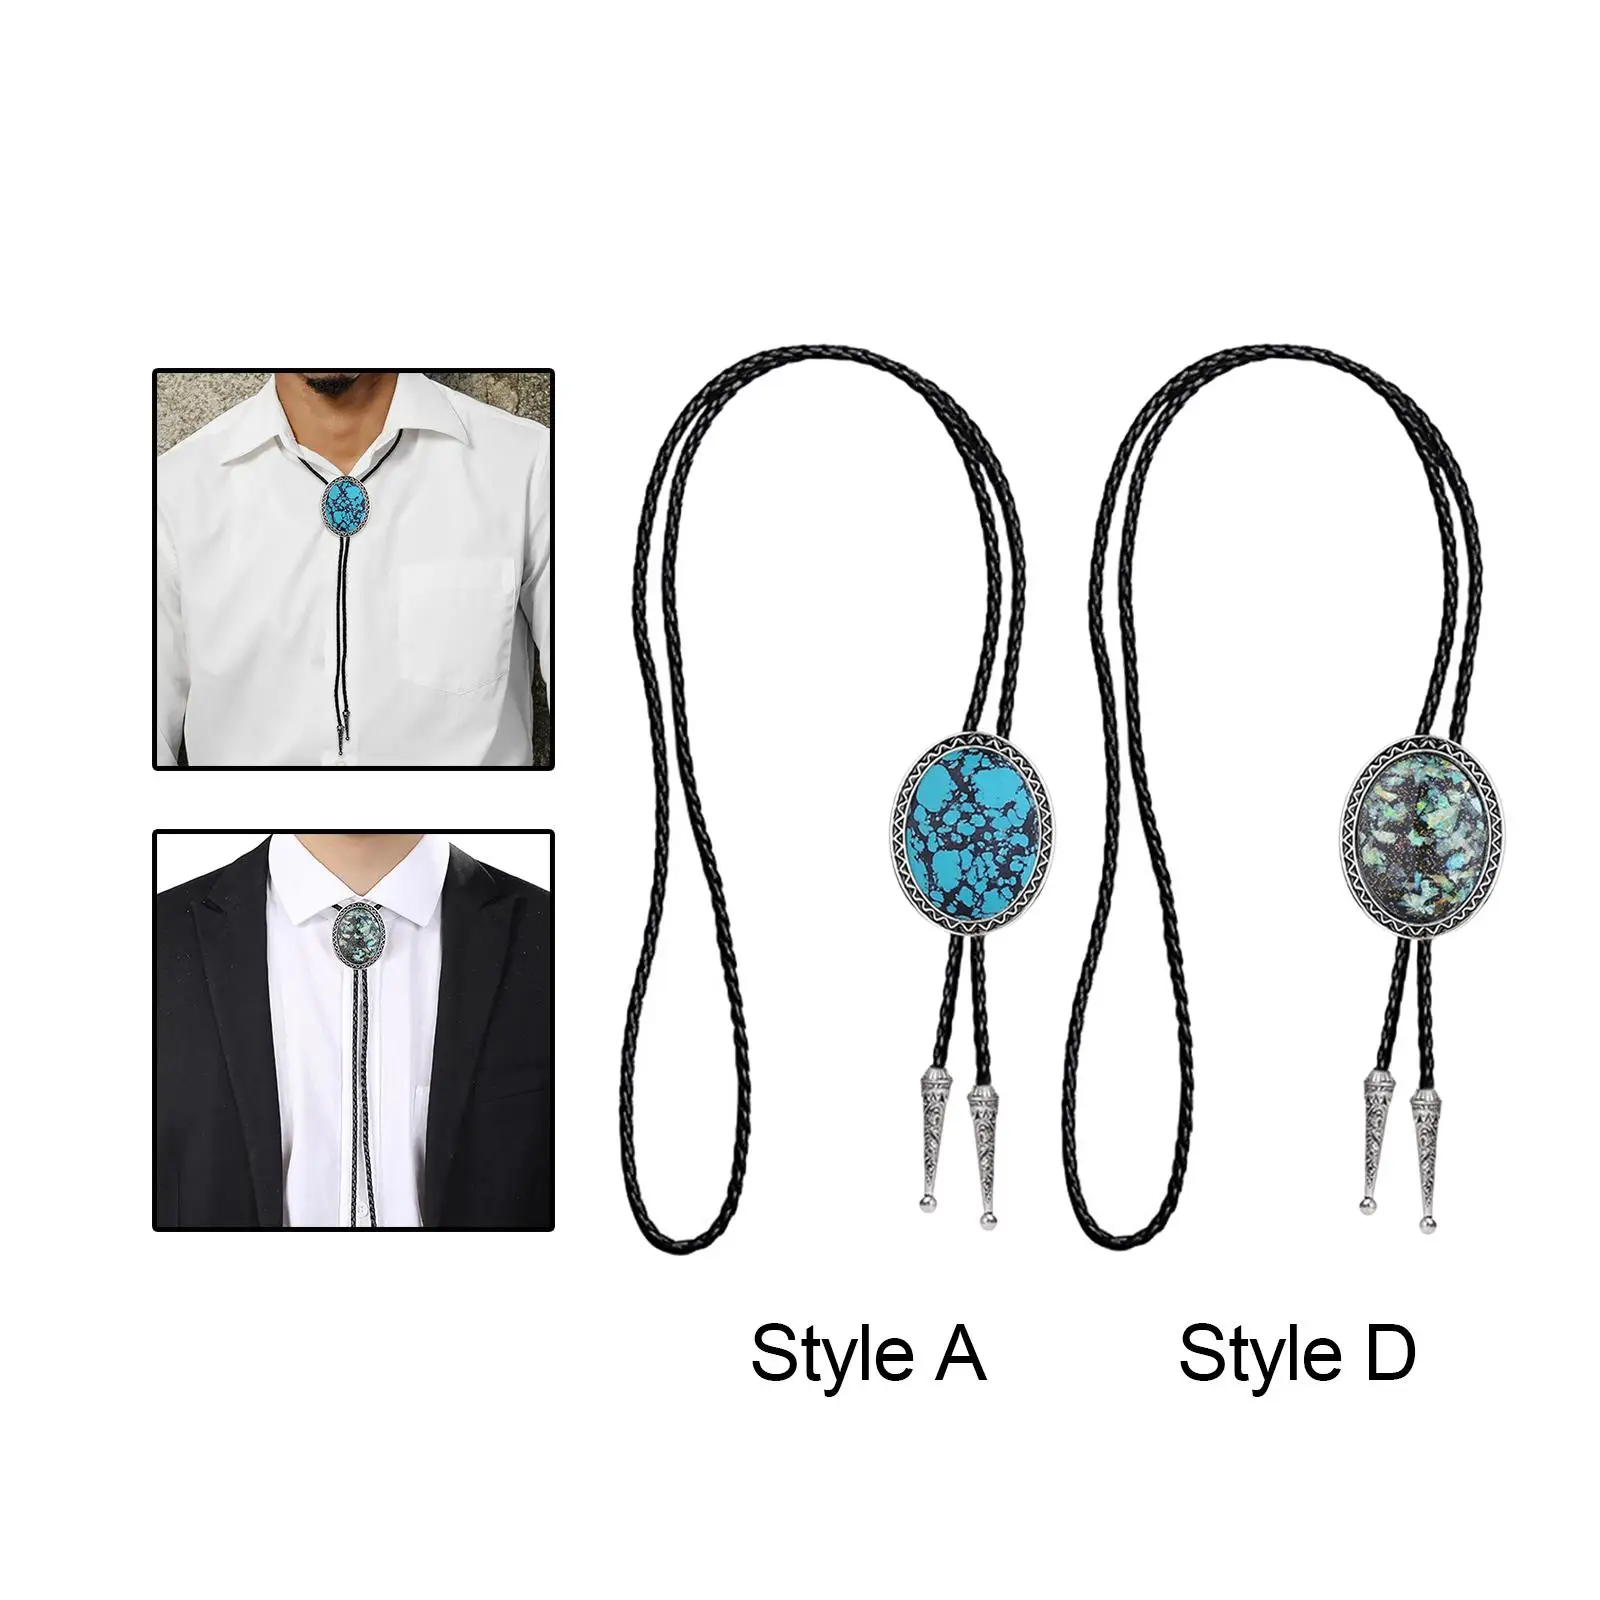 Retro Mens Bolo Tie PU Leather Accessories Stone Neck Rope for Holidays Graduation